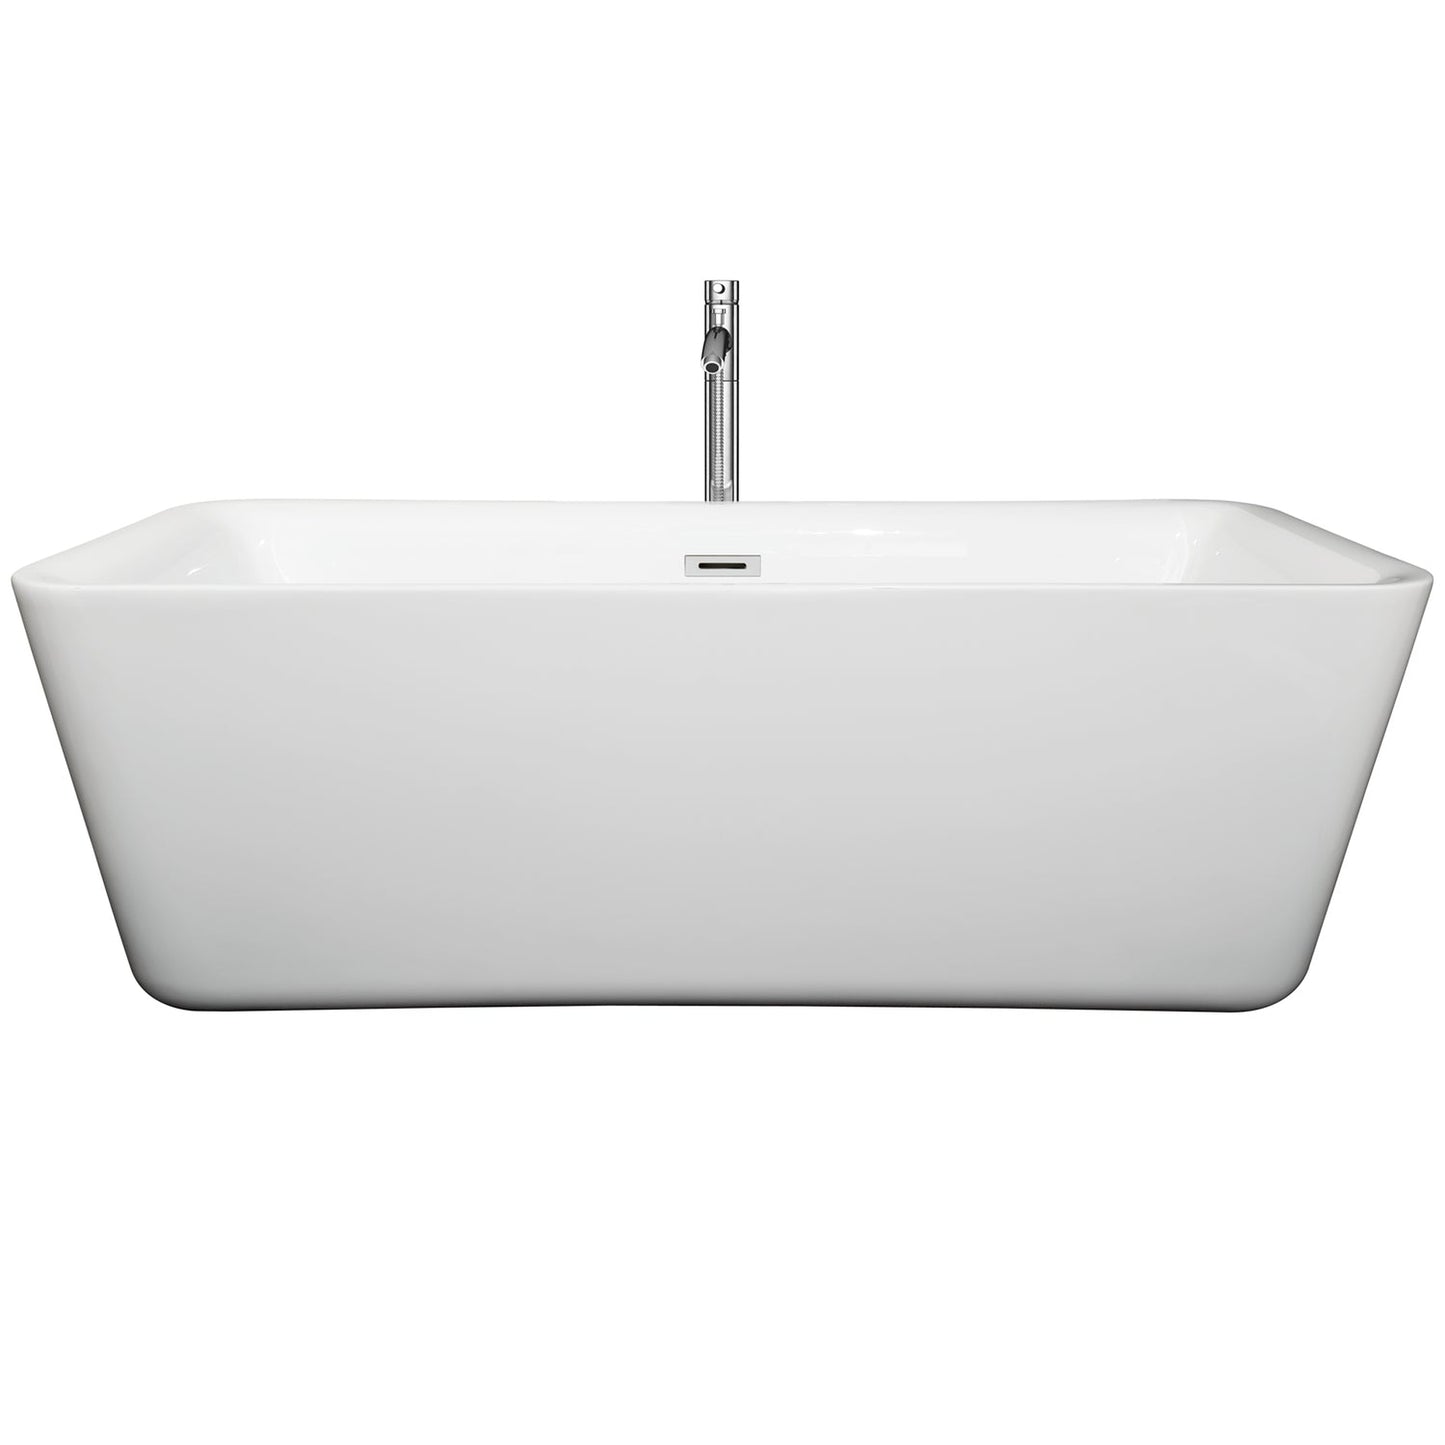 Wyndham Collection Emily 69" Freestanding Bathtub in White With Floor Mounted Faucet, Drain and Overflow Trim in Polished Chrome